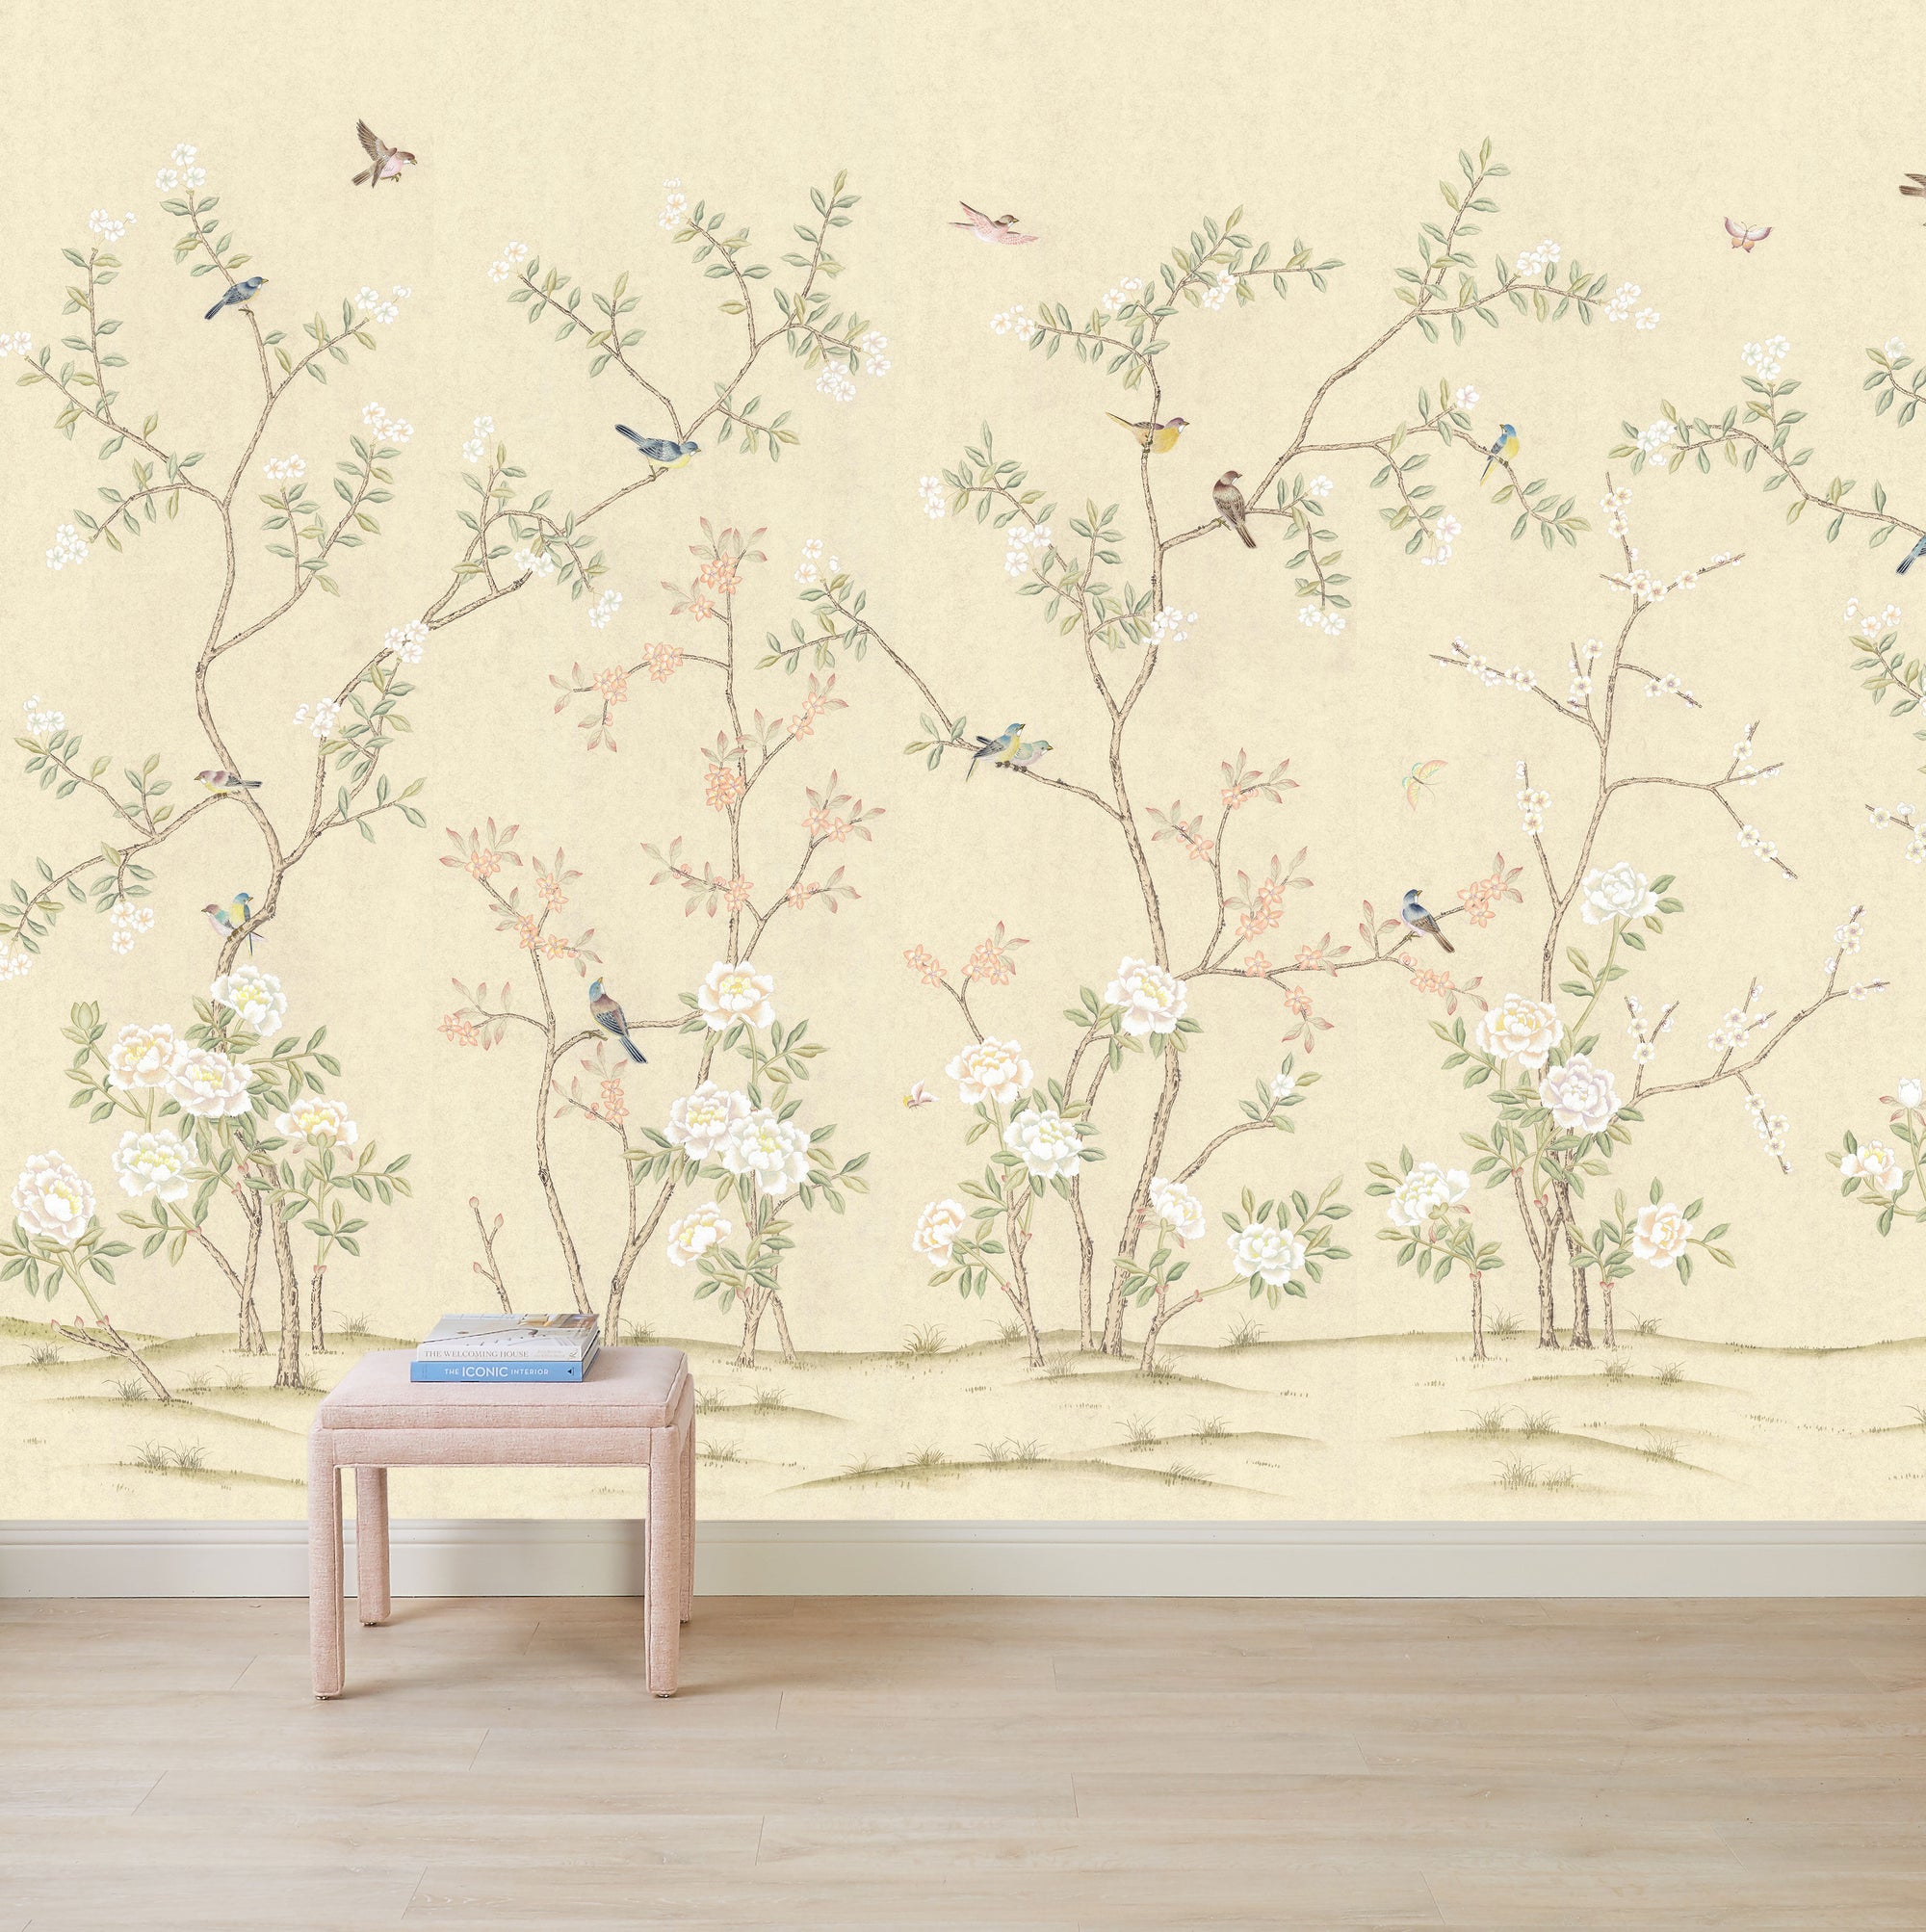 Floral Chinoiserie Wallpaper Mural in Abingdon Cream Design on Wall